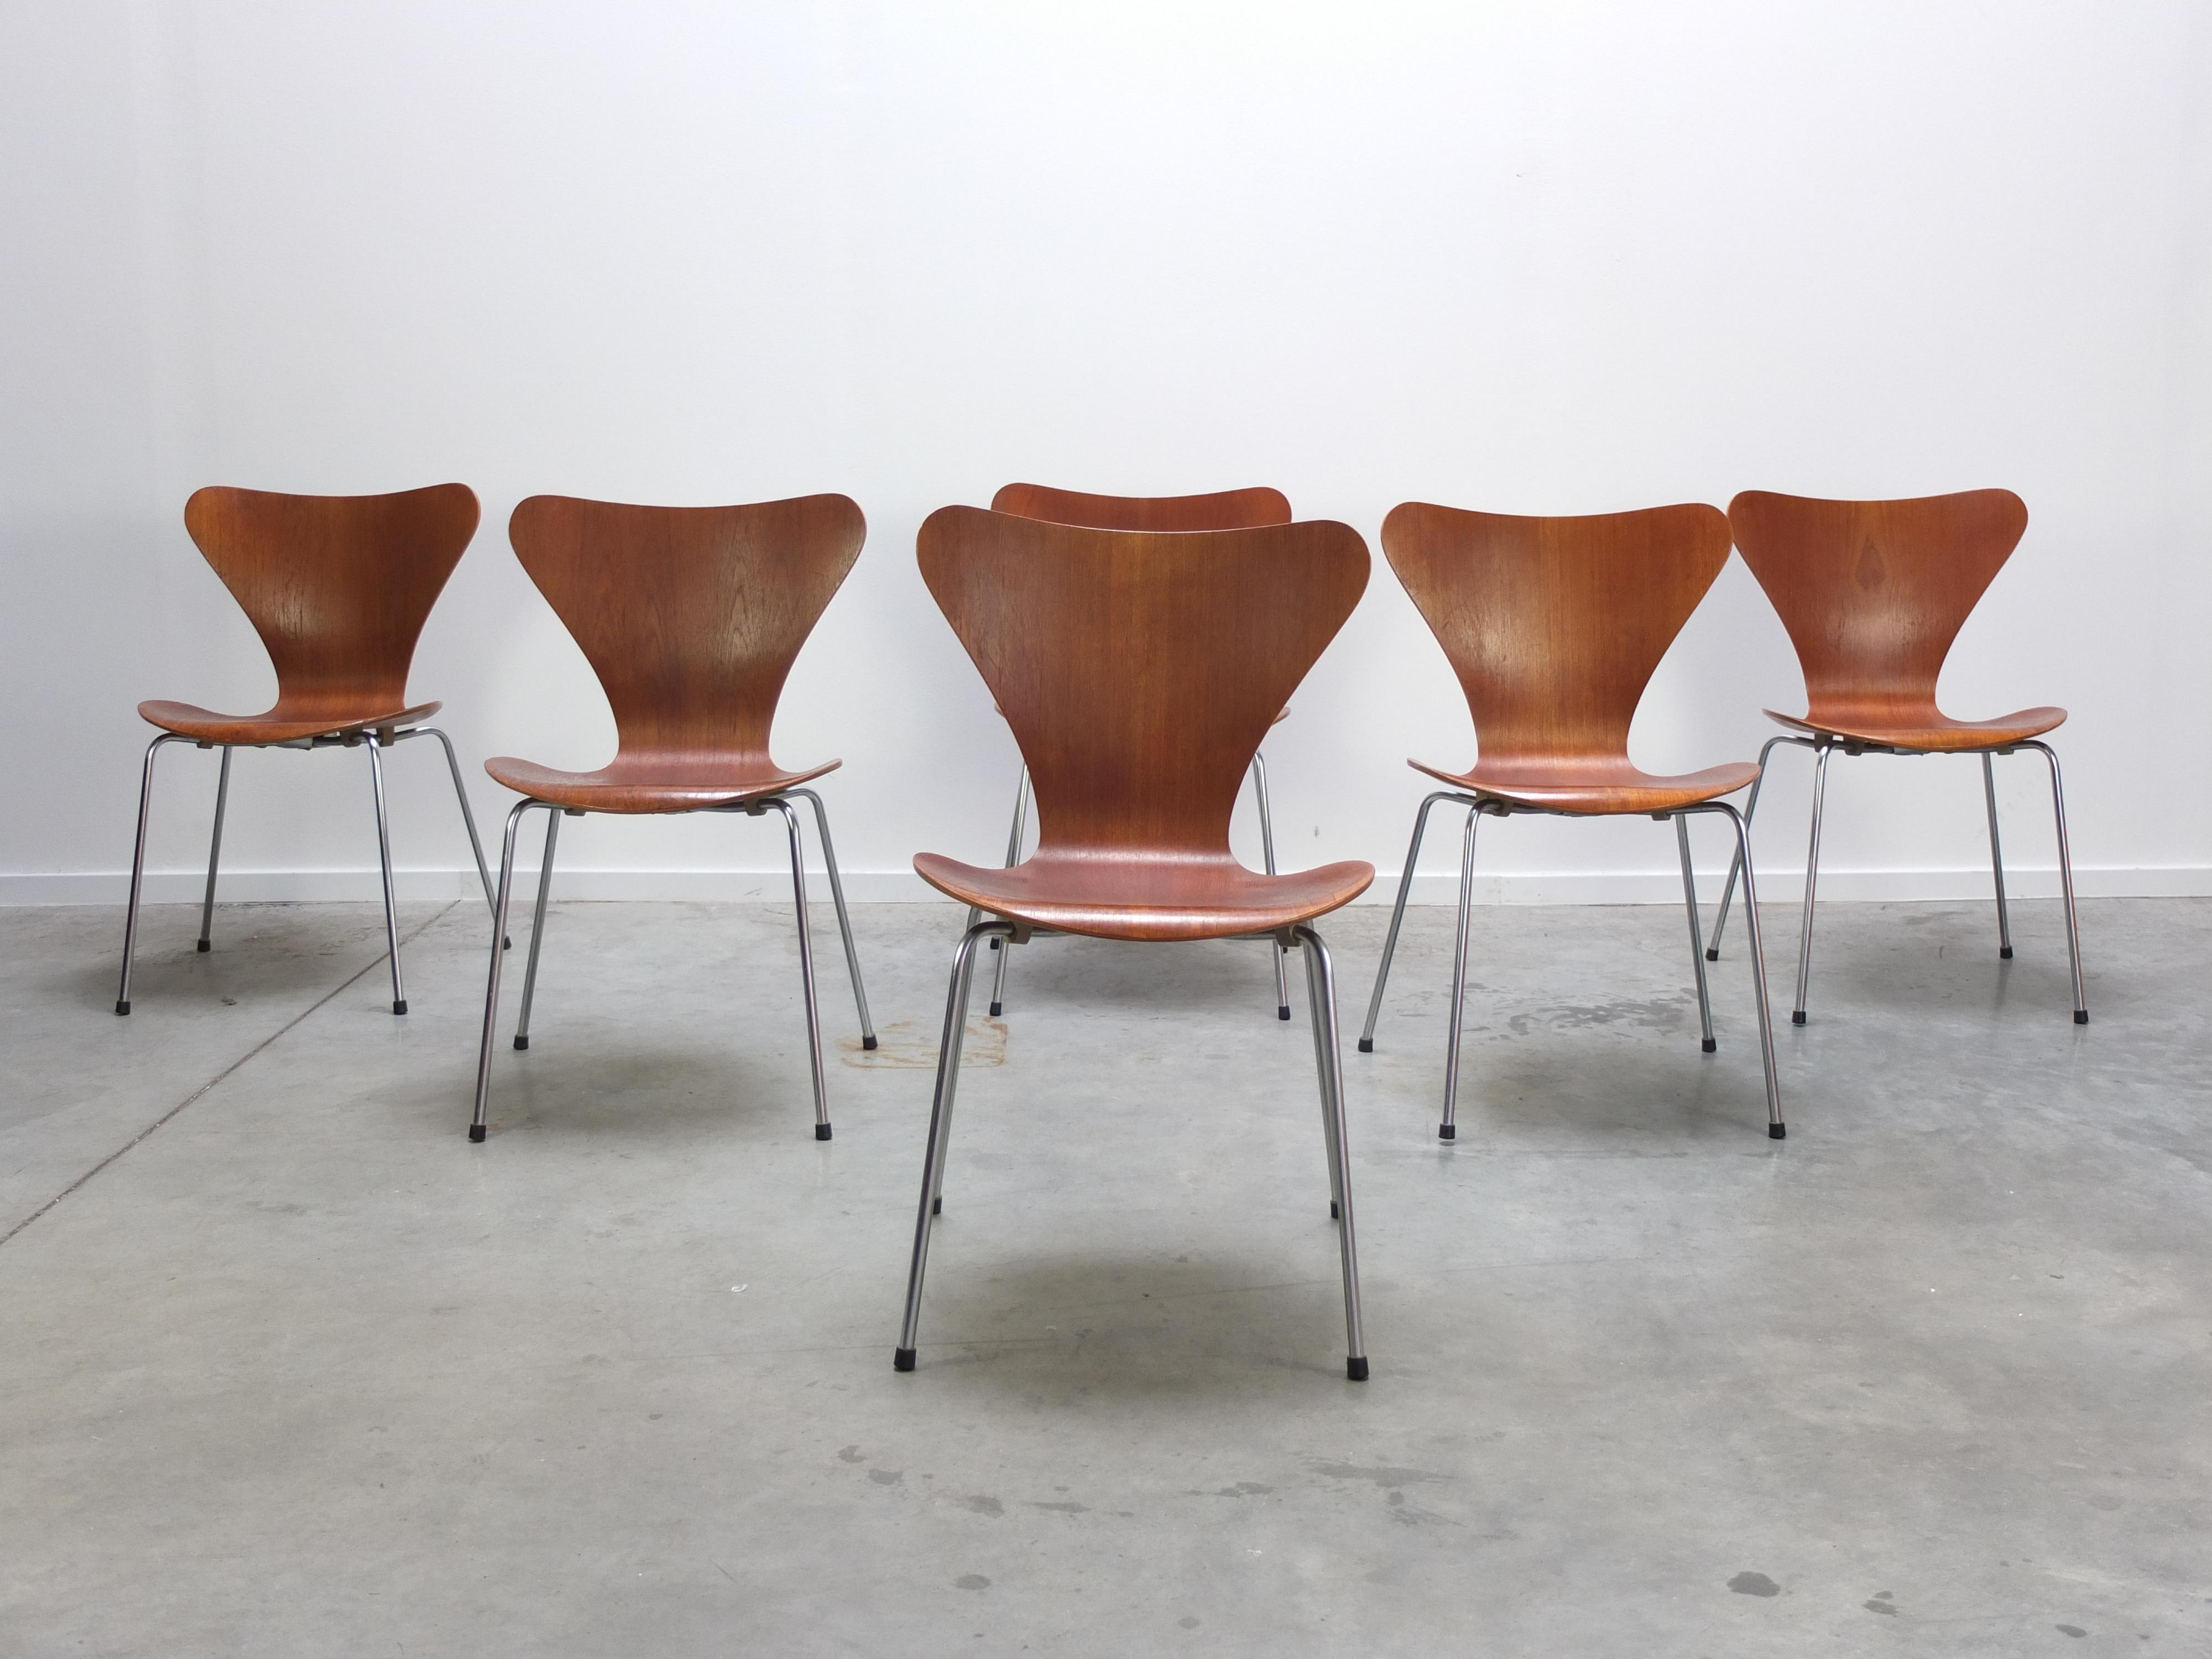 Great set of 6 ‘Series 7’ dining chairs designed by Arne Jacobsen in 1955. These examples are made of beautiful teak wood and are not in production anymore. All chairs are in good condition with solid back supports and only small traces of use. Very